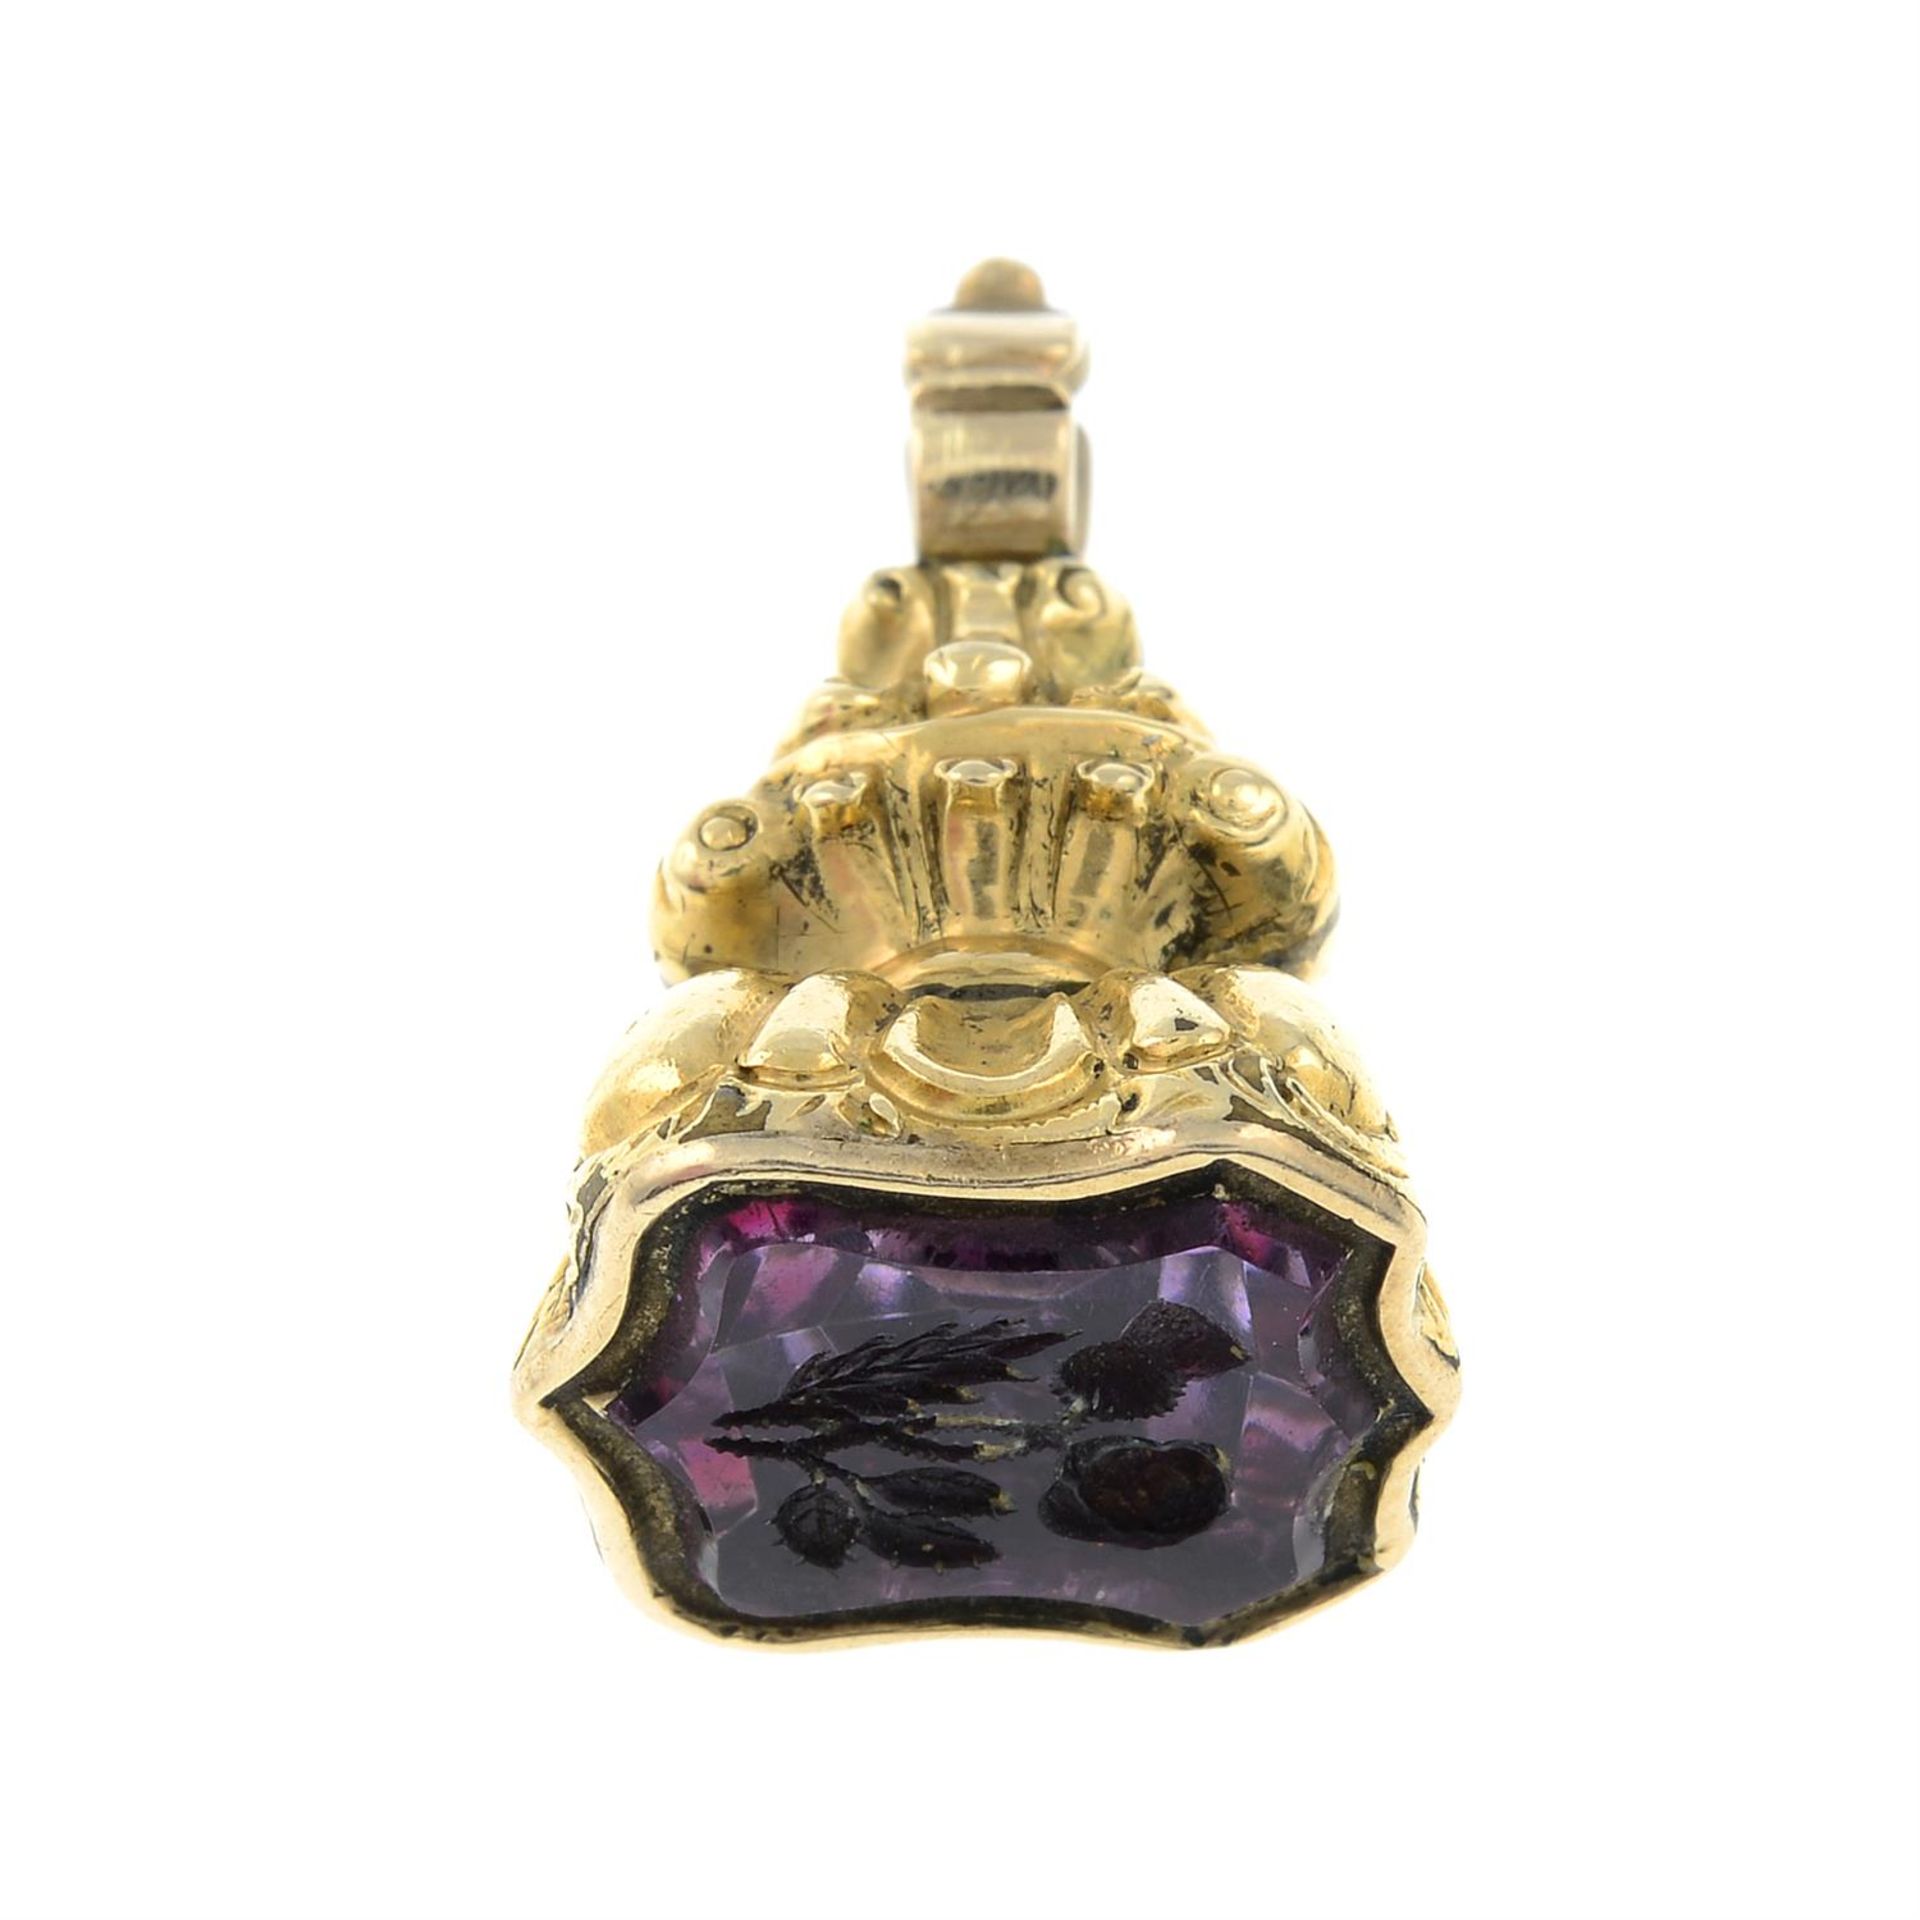 A late 19th century amethyst intaglio fob seal, depicting an entwined thistle and rose.